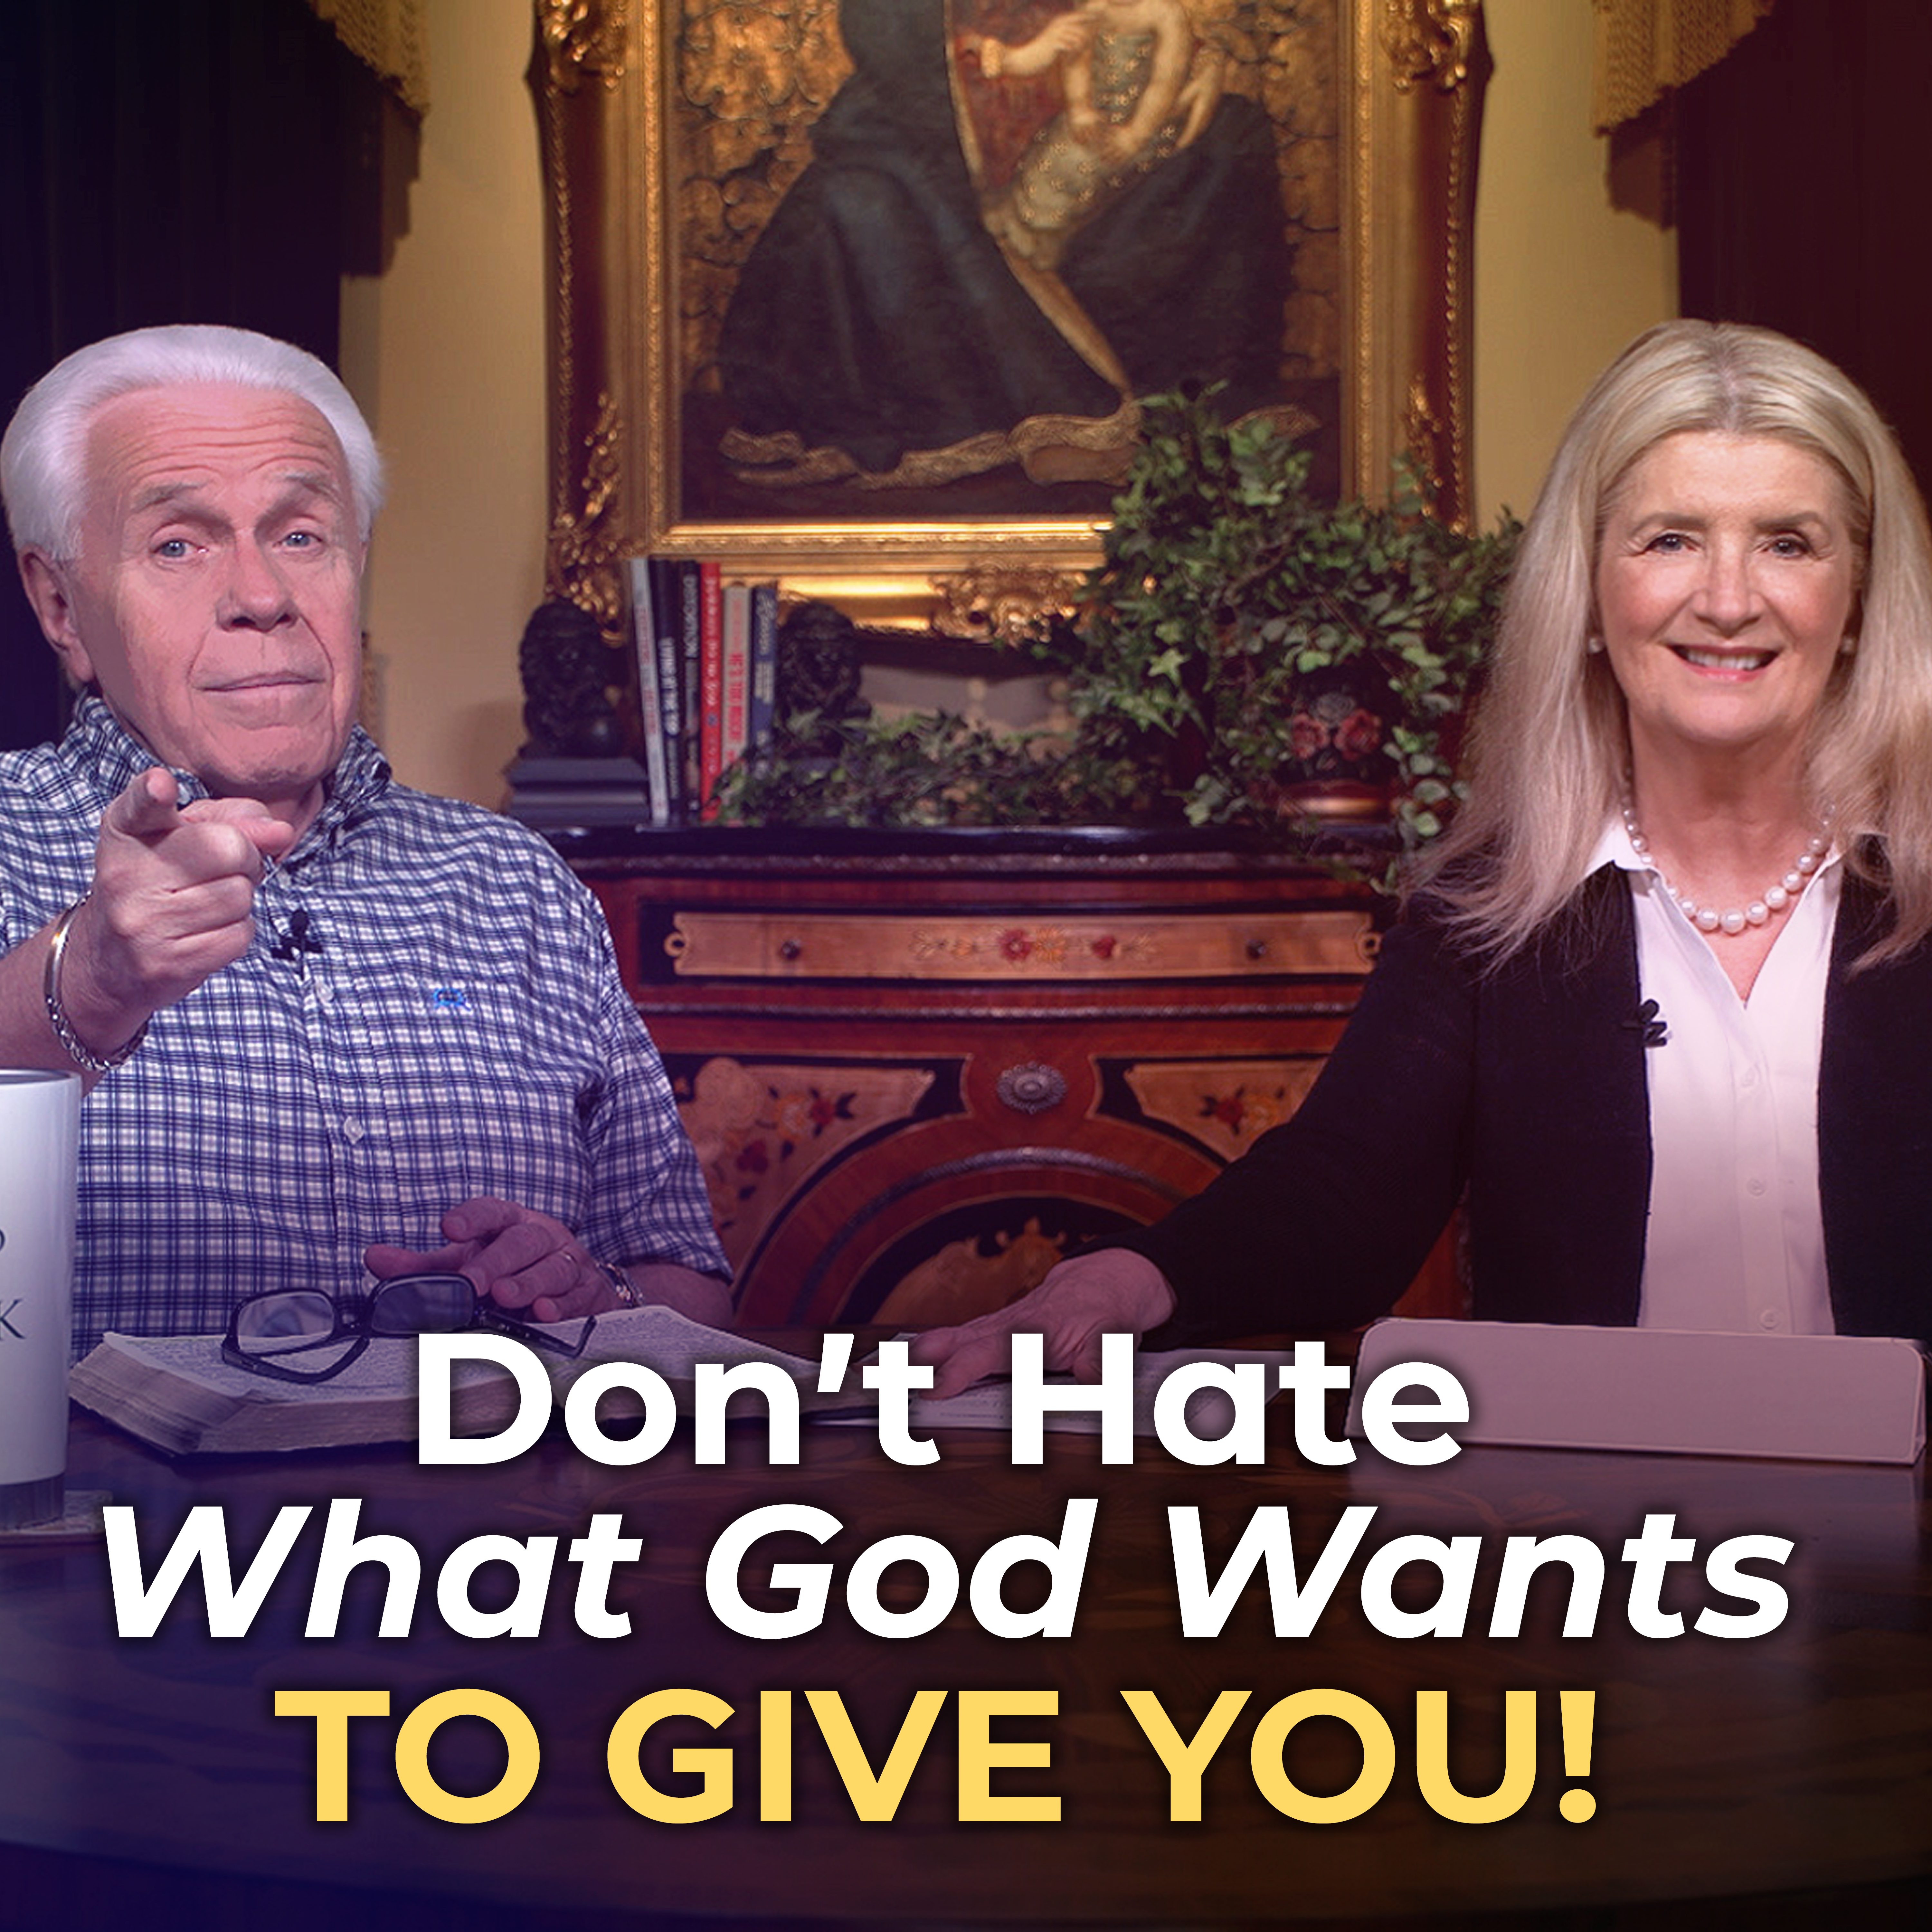 Don’t Hate What God Wants To Give You!